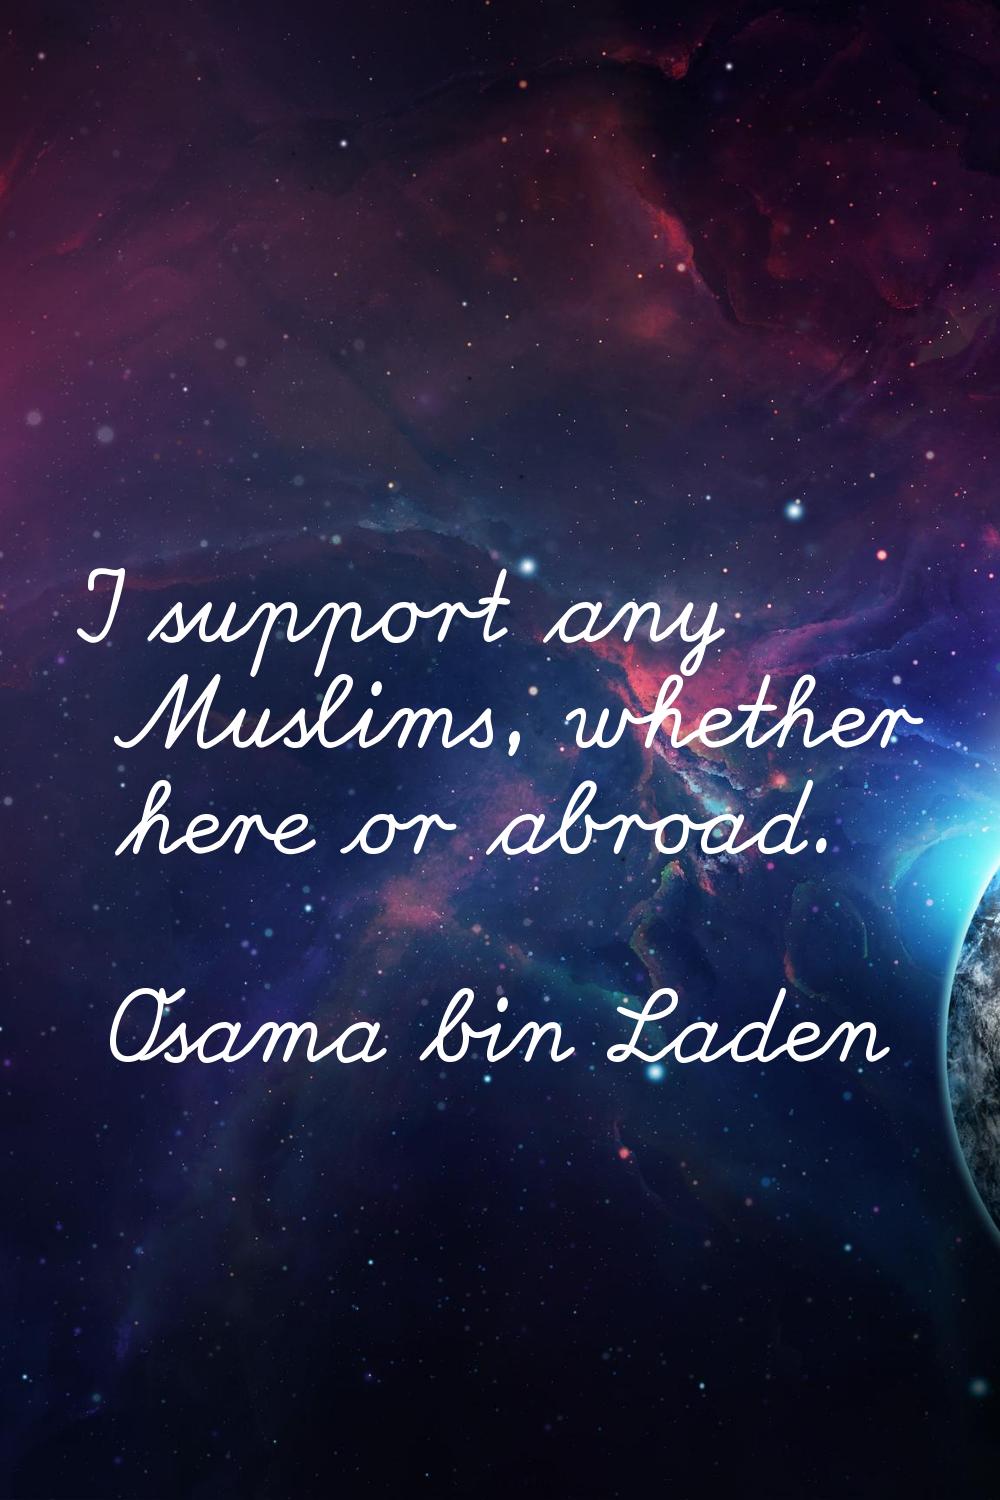 I support any Muslims, whether here or abroad.